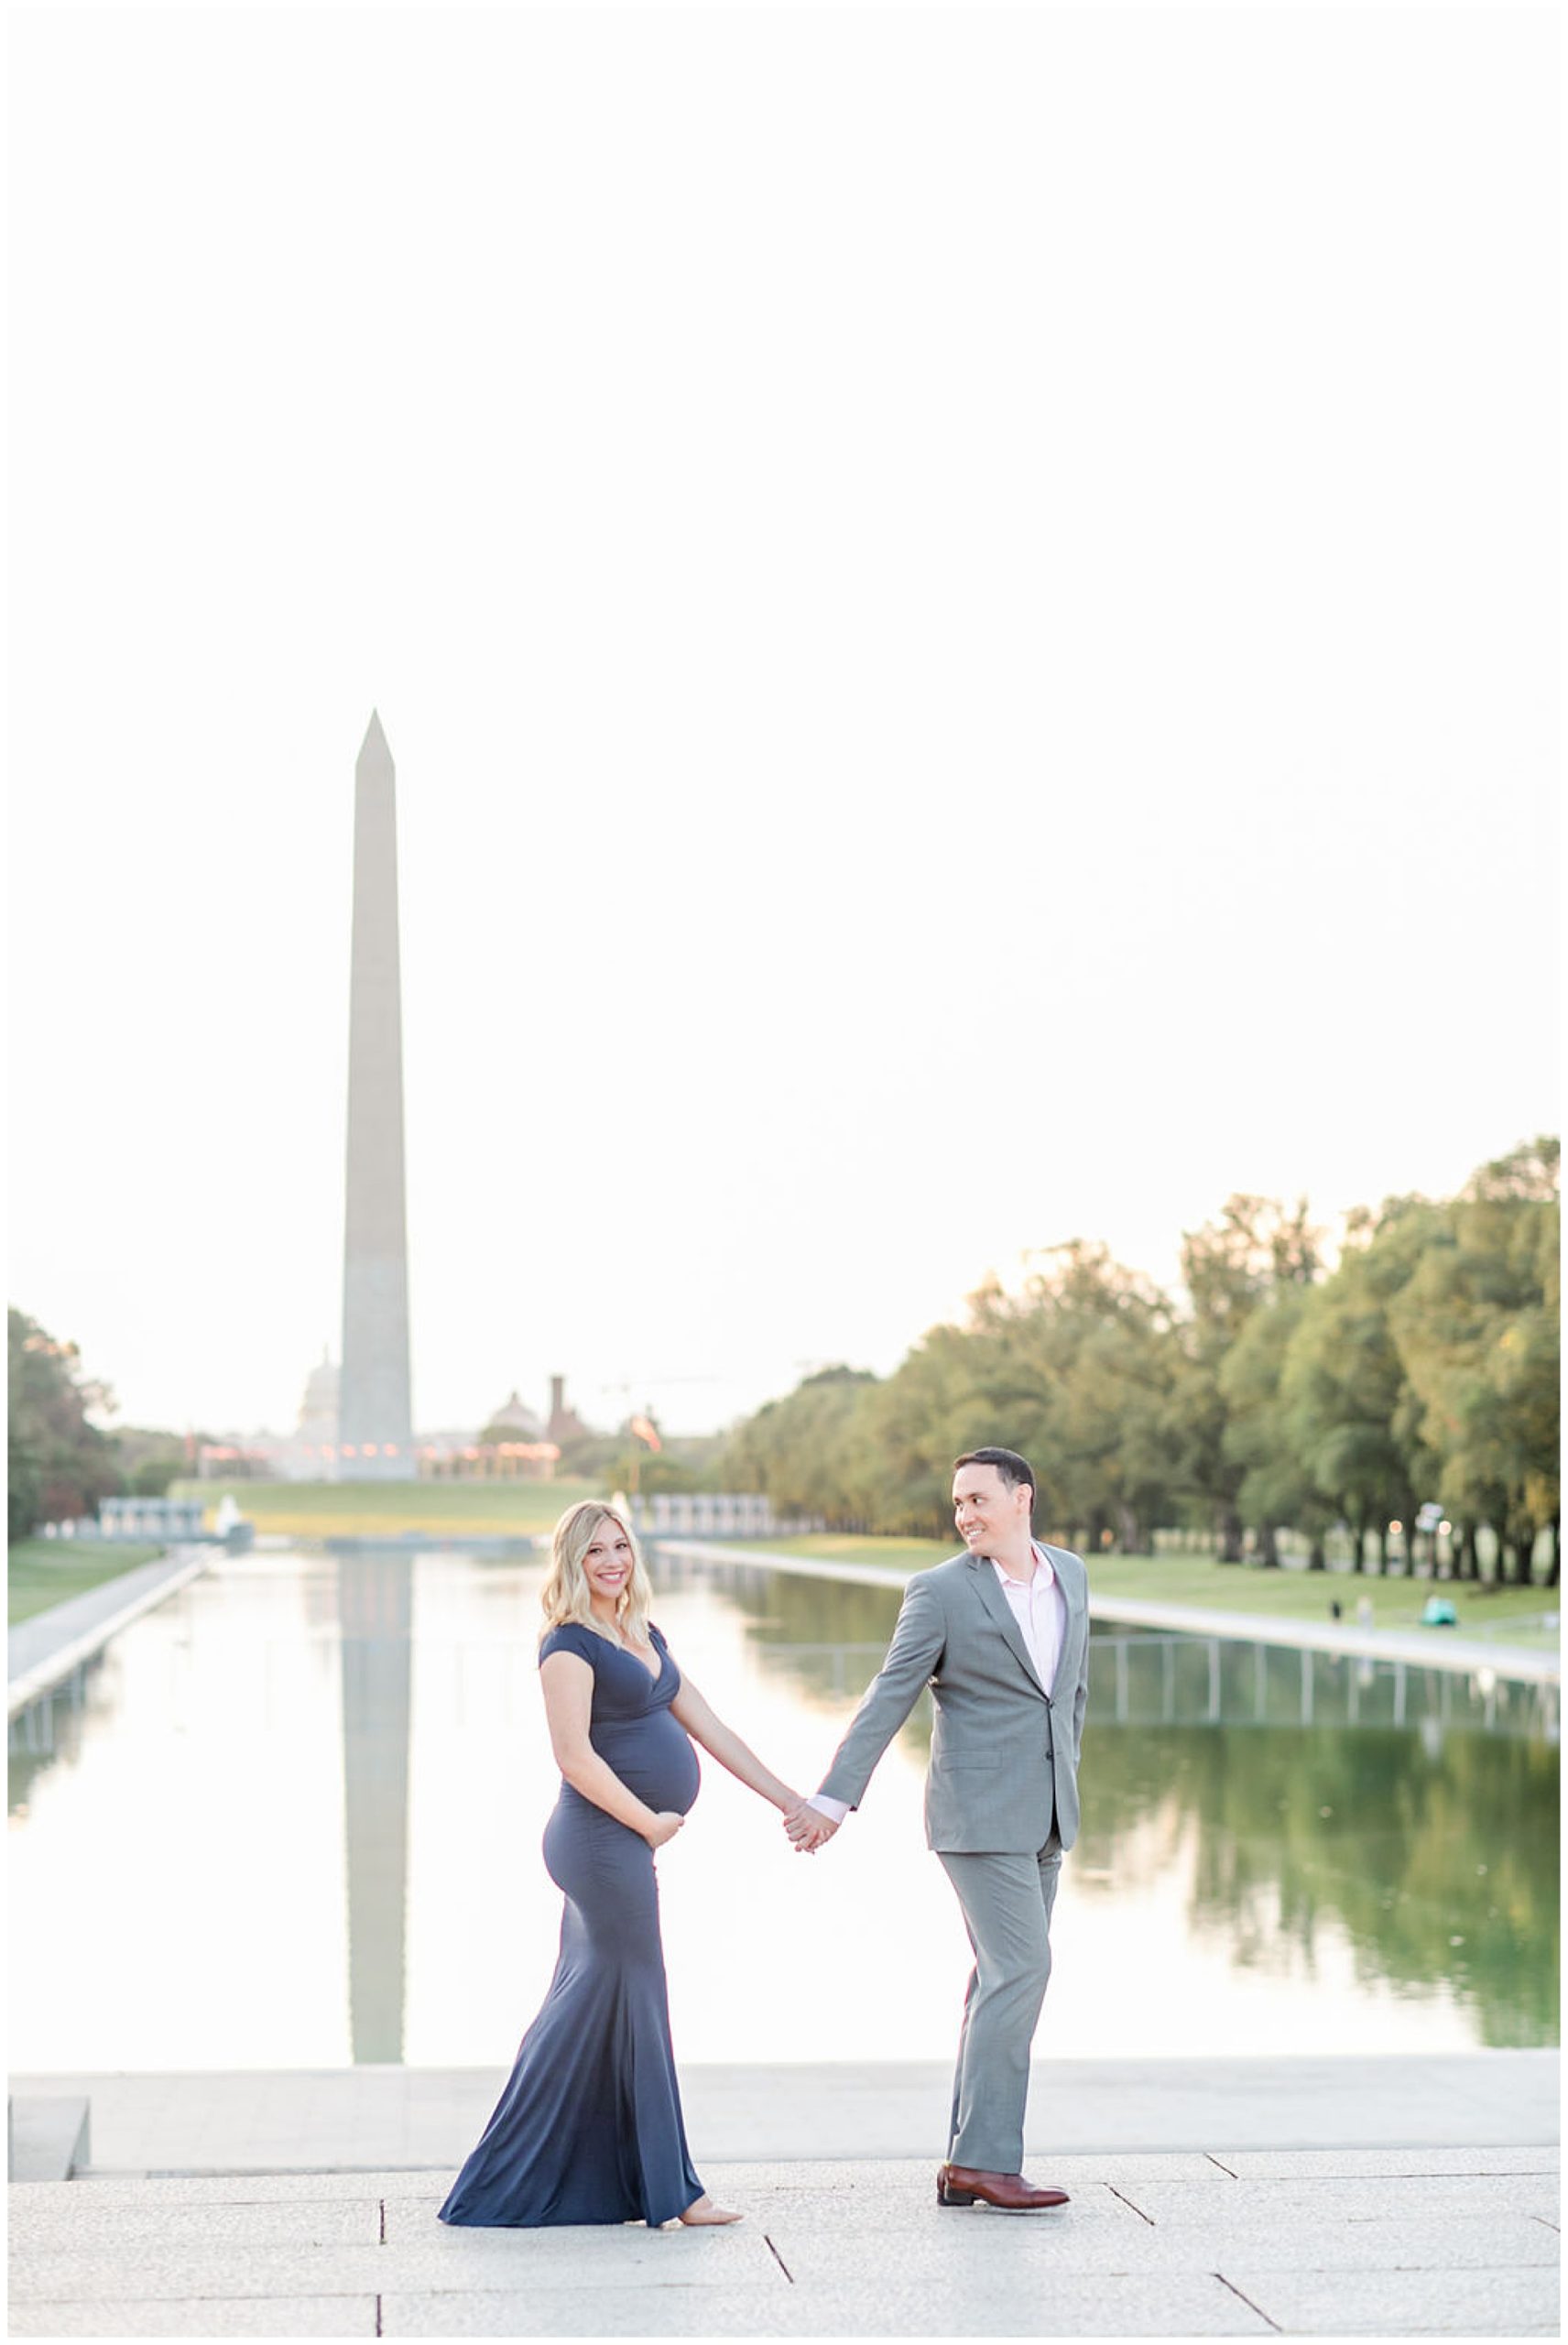 National Mall maternity photos, Lincoln Memorial maternity photos, Constitution Gardens maternity photos, DC maternity photos, DC maternity photographer, classic DC portraits, pregnant couple, natural light maternity photos, Rachel E.H. Photography, couple holding hands from distance